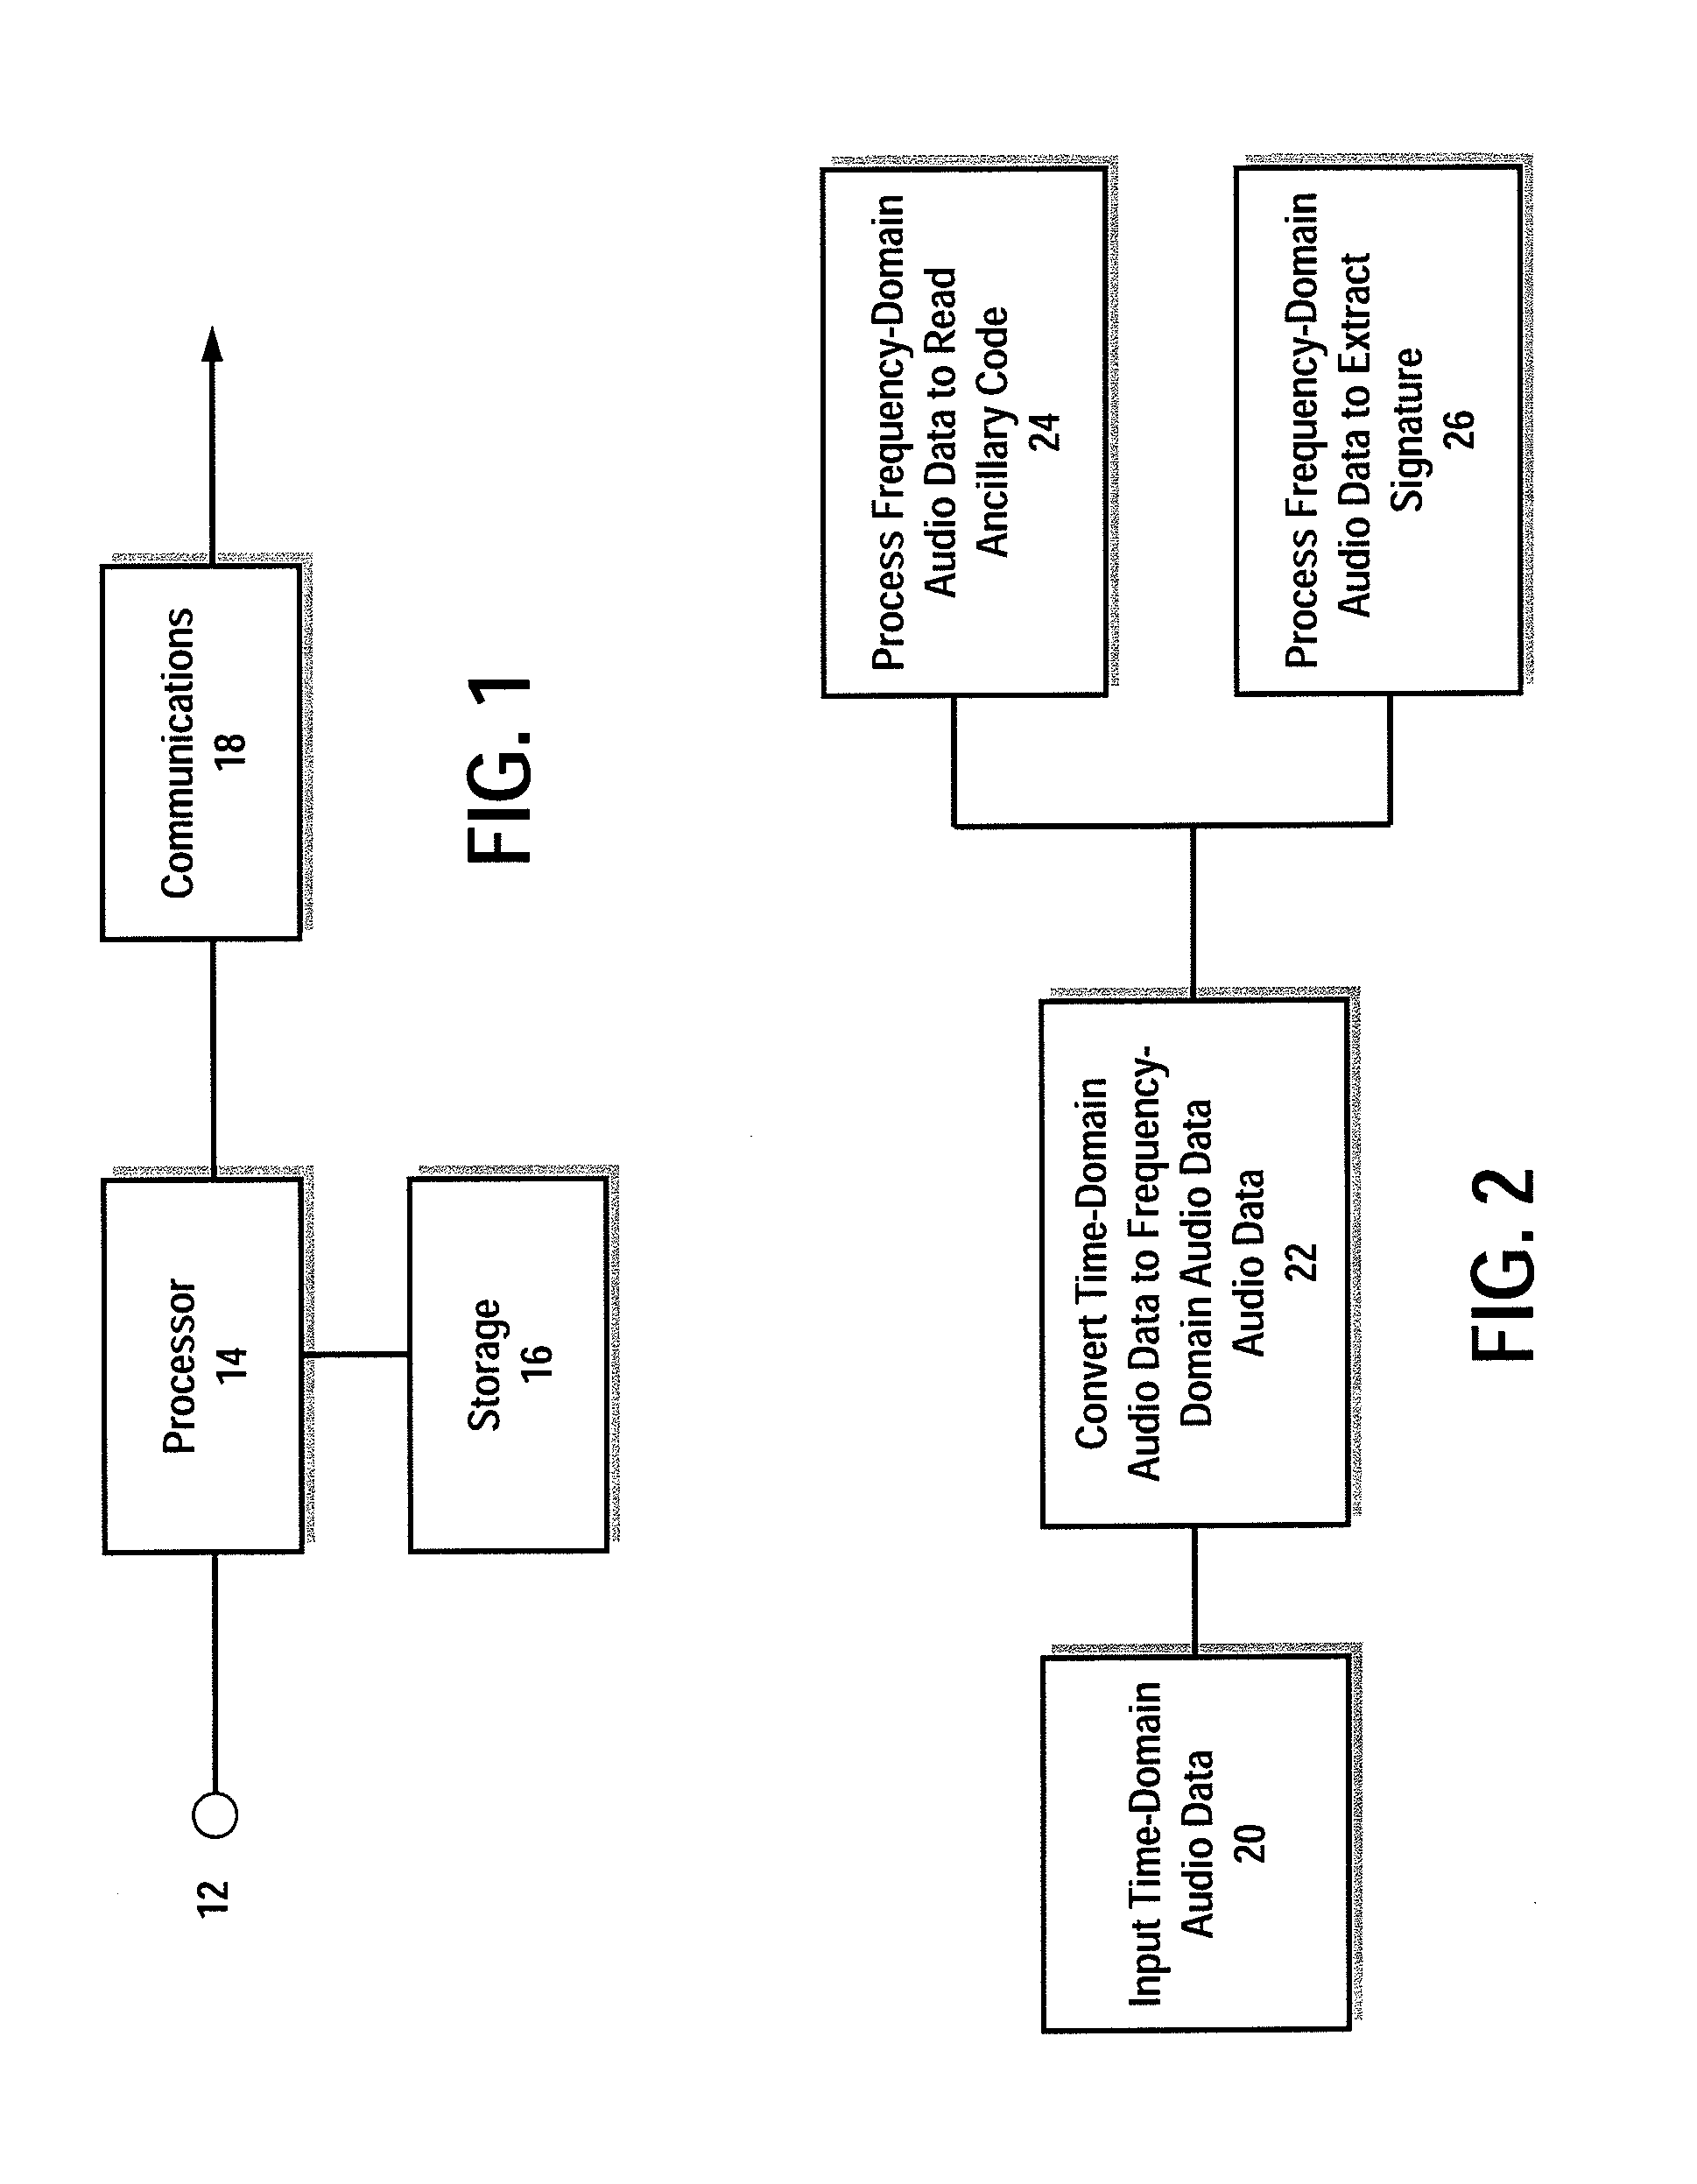 Apparatus, system and method for activating functions in processing devices using encoded audio and audio signatures